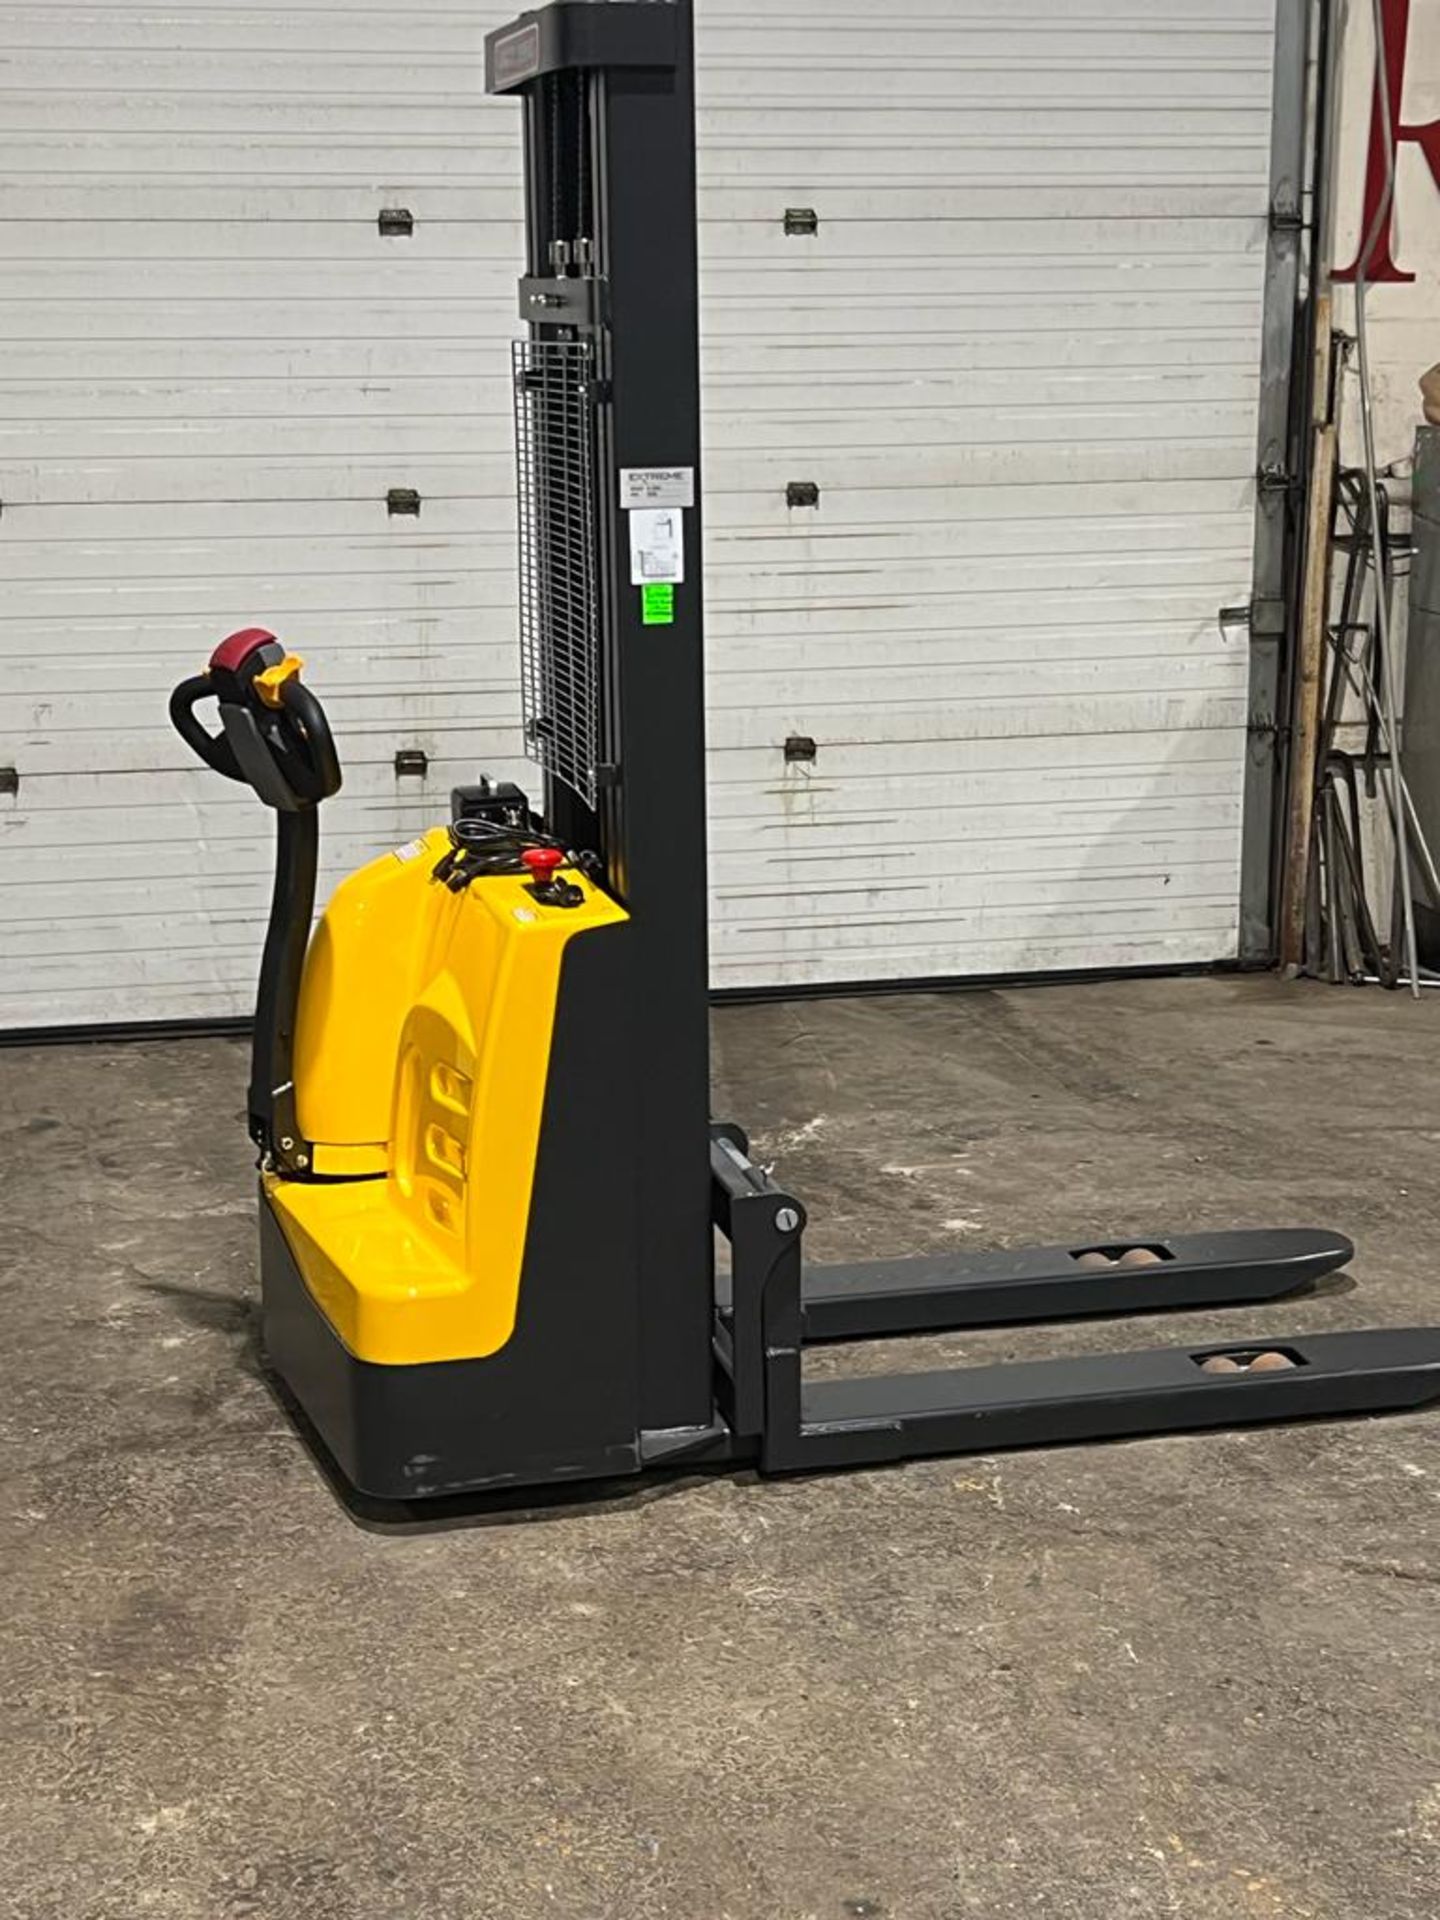 NEW Extreme 3,300lbs / 1,500kg capacity ALL POWER Pallet Stacker NEW 24V BATTERY - Walkie unit - Image 4 of 4